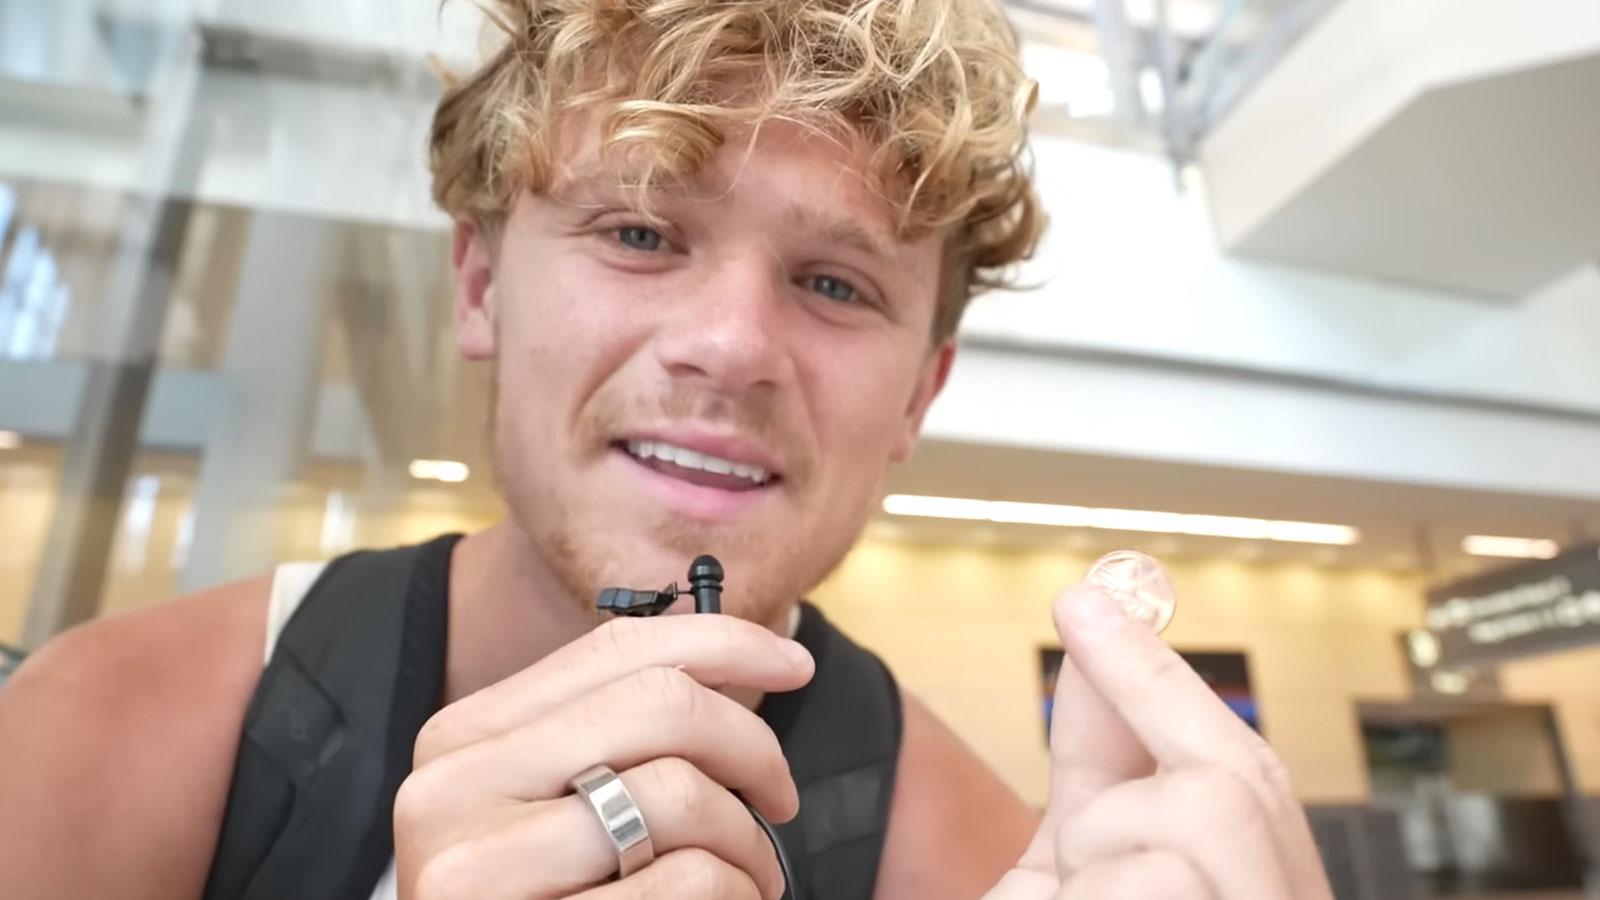 YouTuber Ryan Trahan holding a penny in an airport